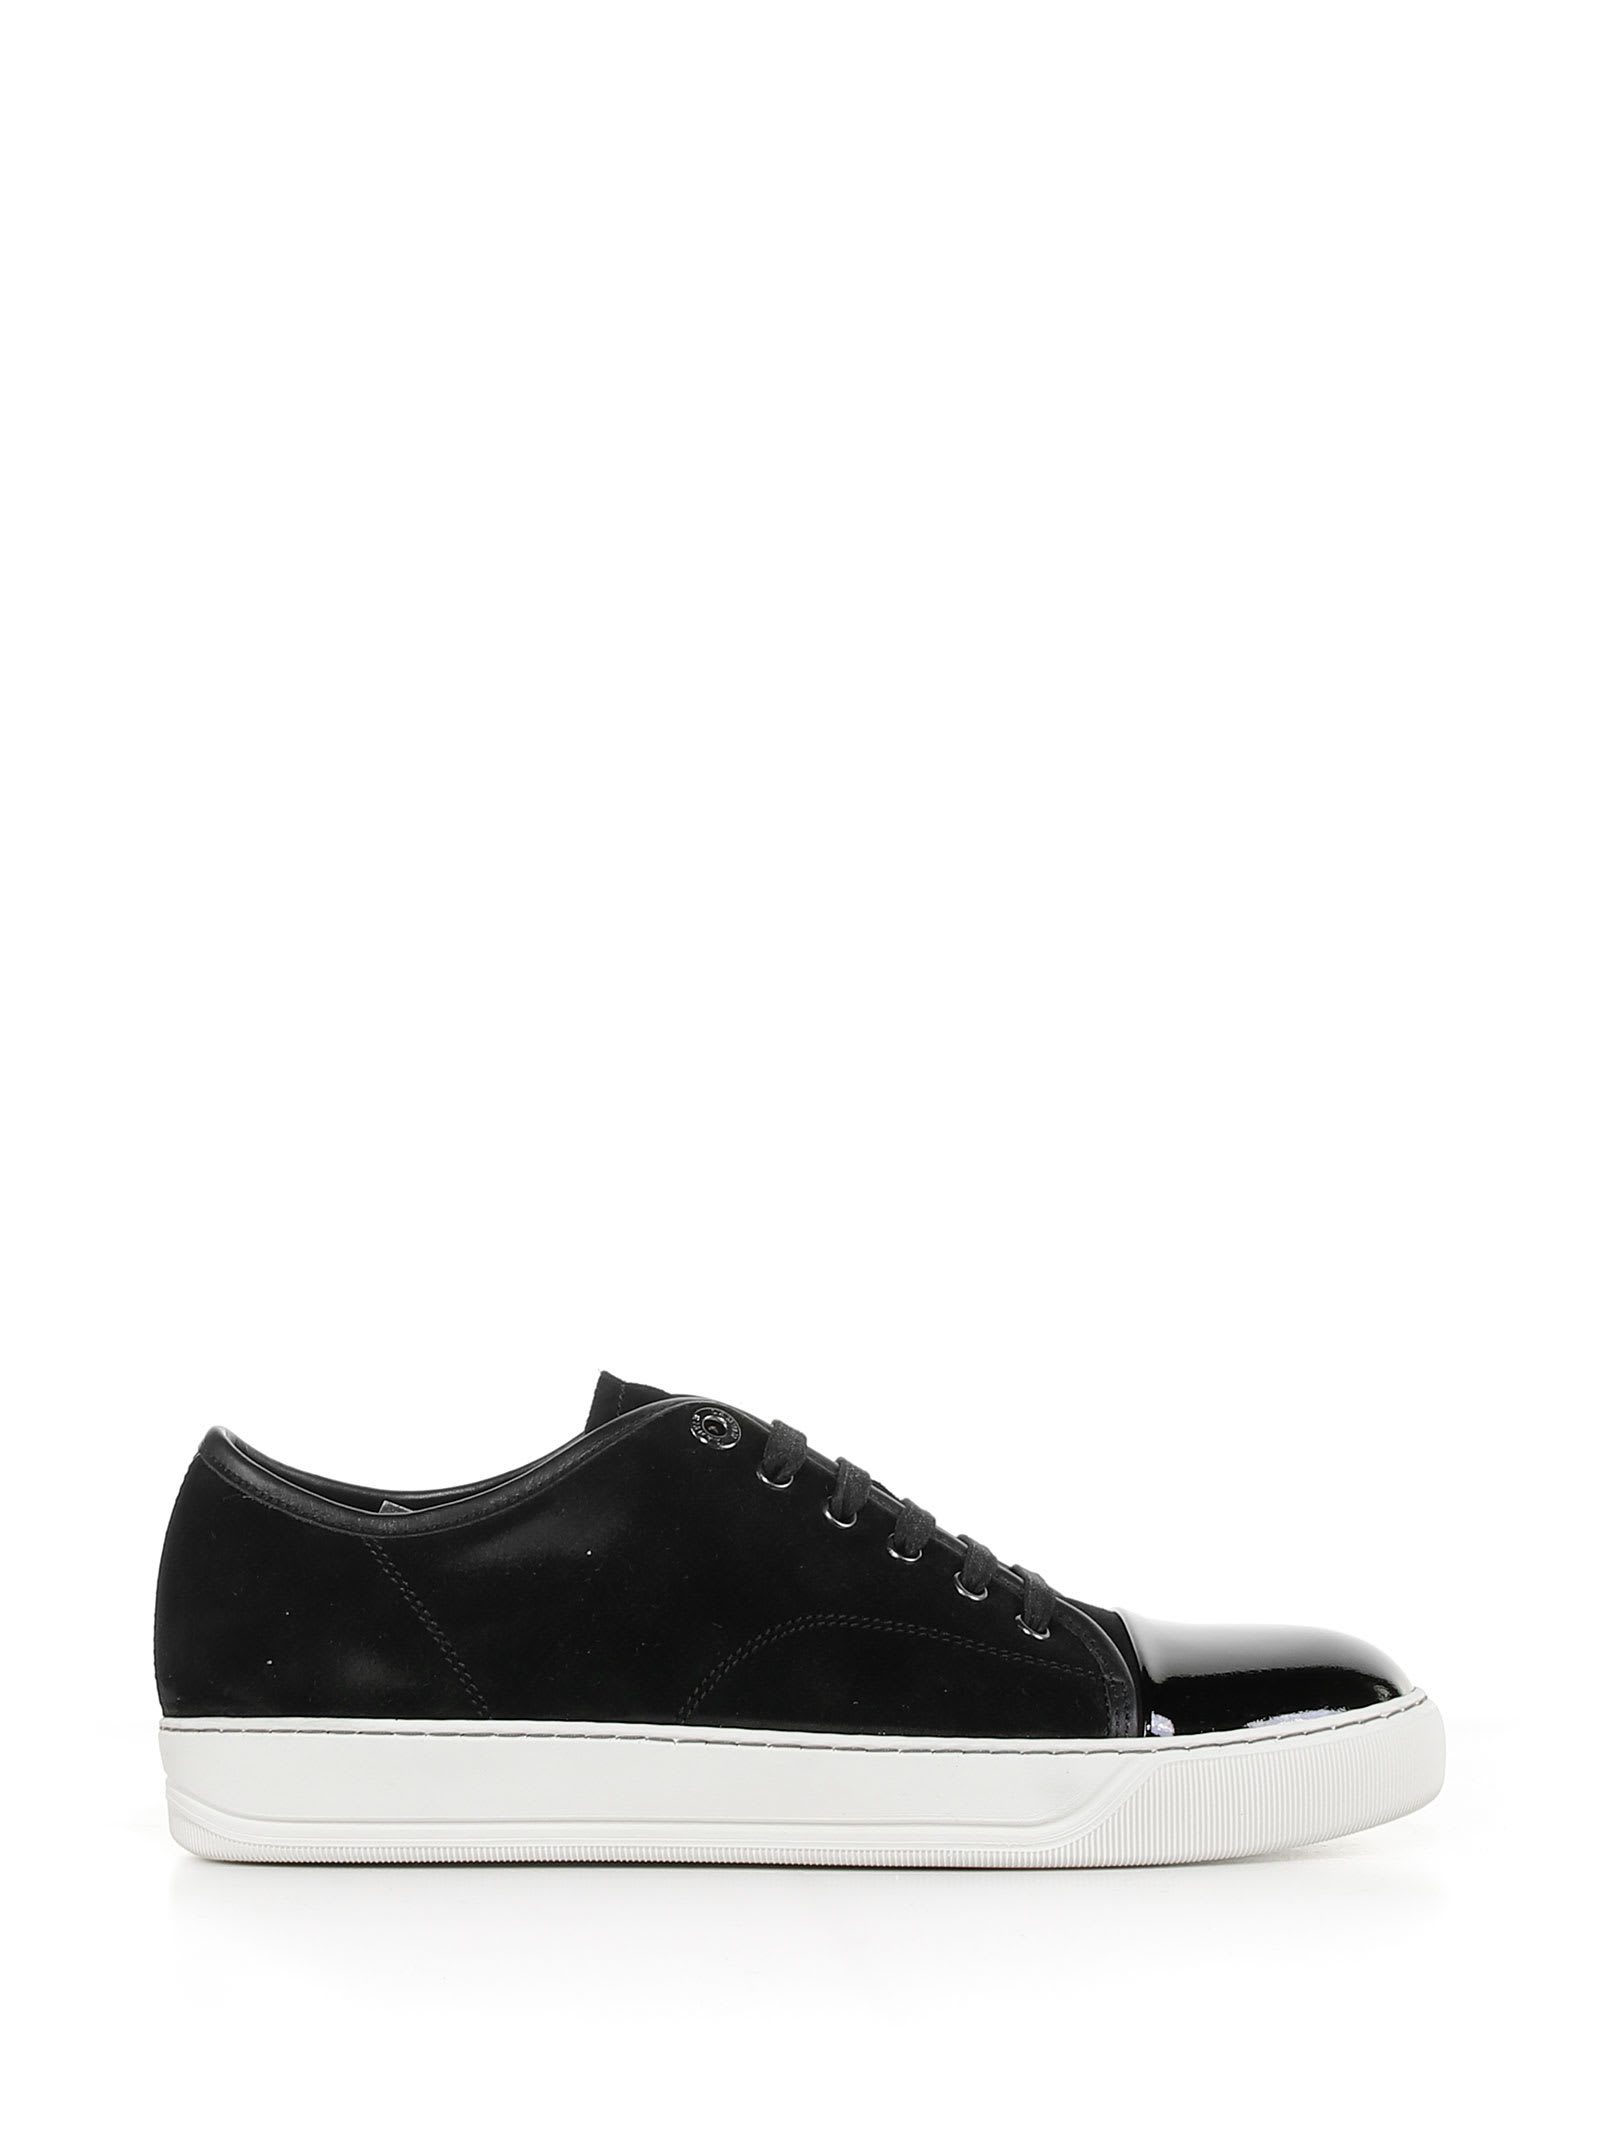 Lanvin Sneaker In Suede And Shiny Leather